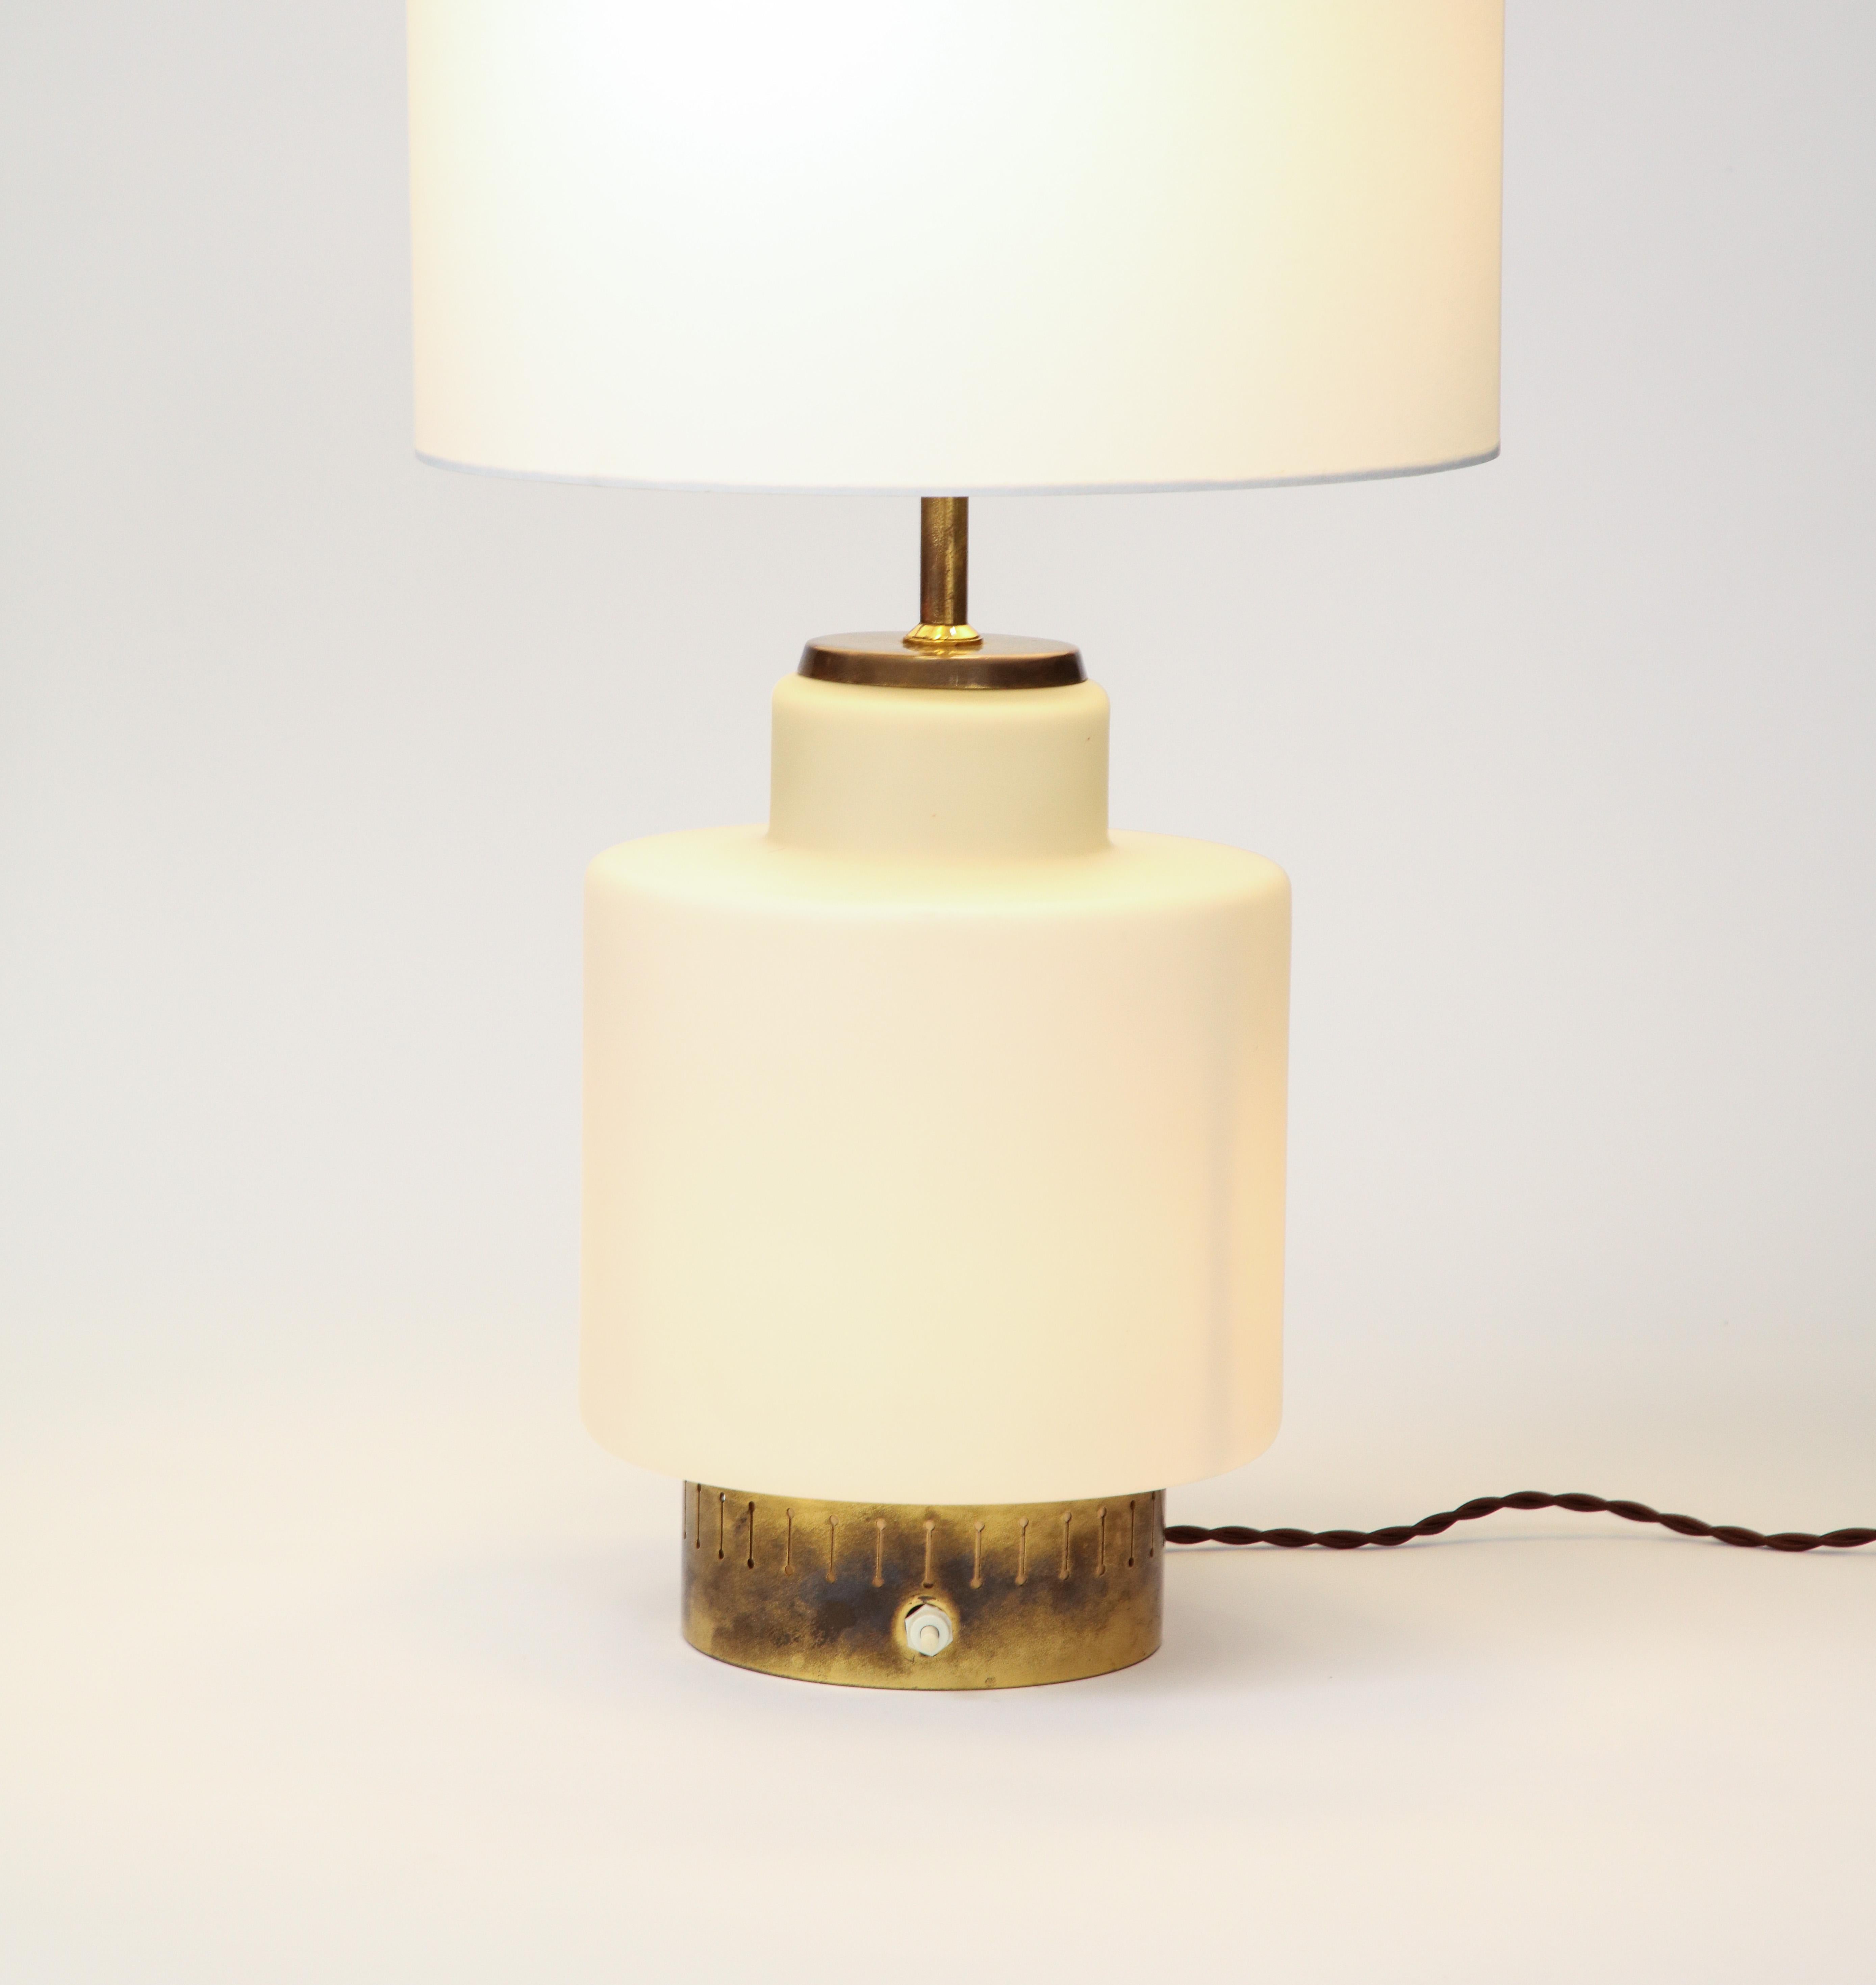 Stilnovo Opaline & Brass Lamp, mod. 8055, Parchment Shade, Italy, c. 1950's For Sale 9